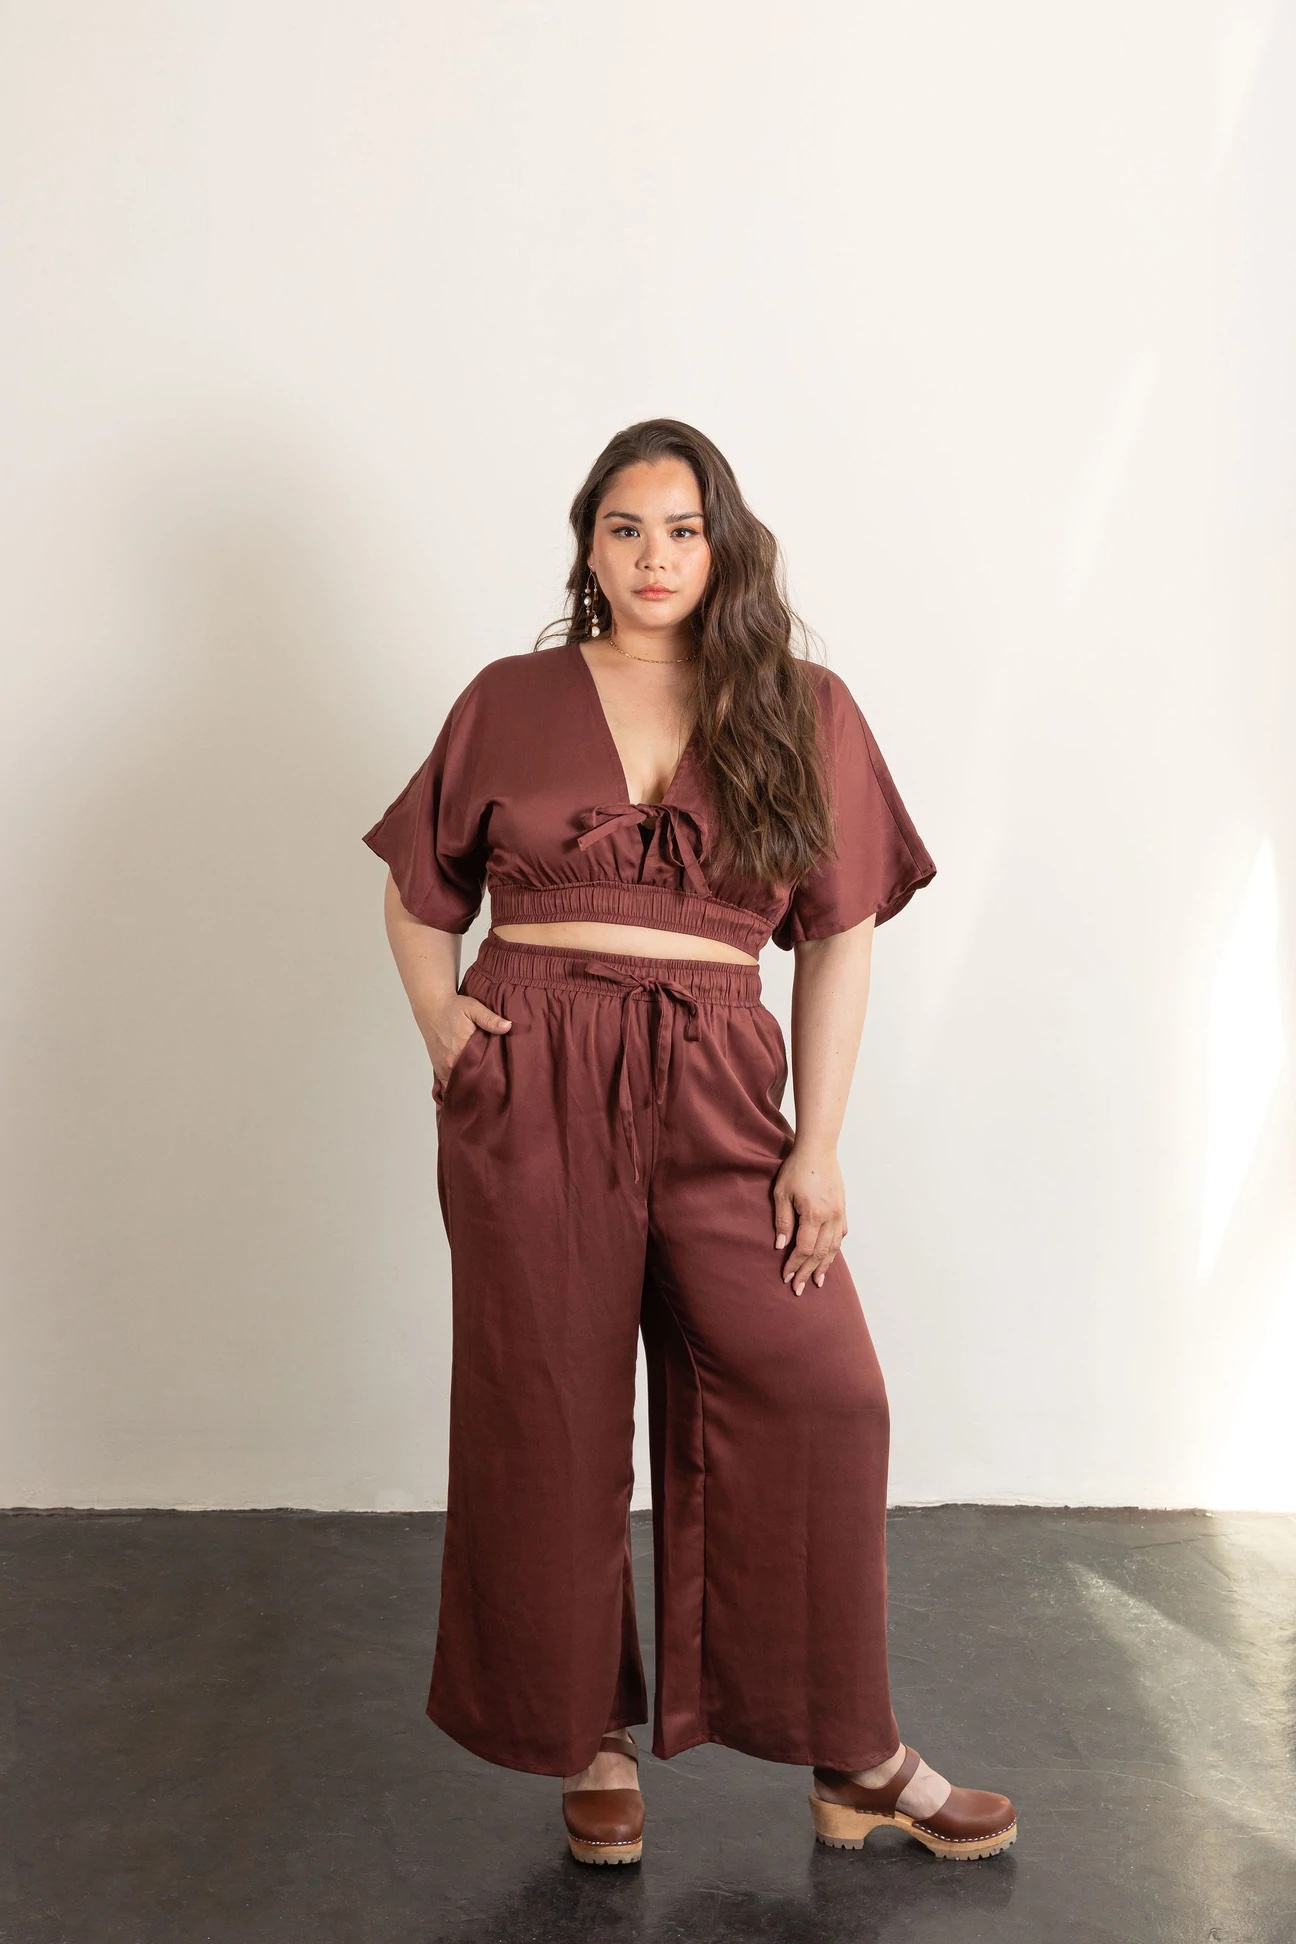 Women's Co-Ord Sets, Two Piece Outfits